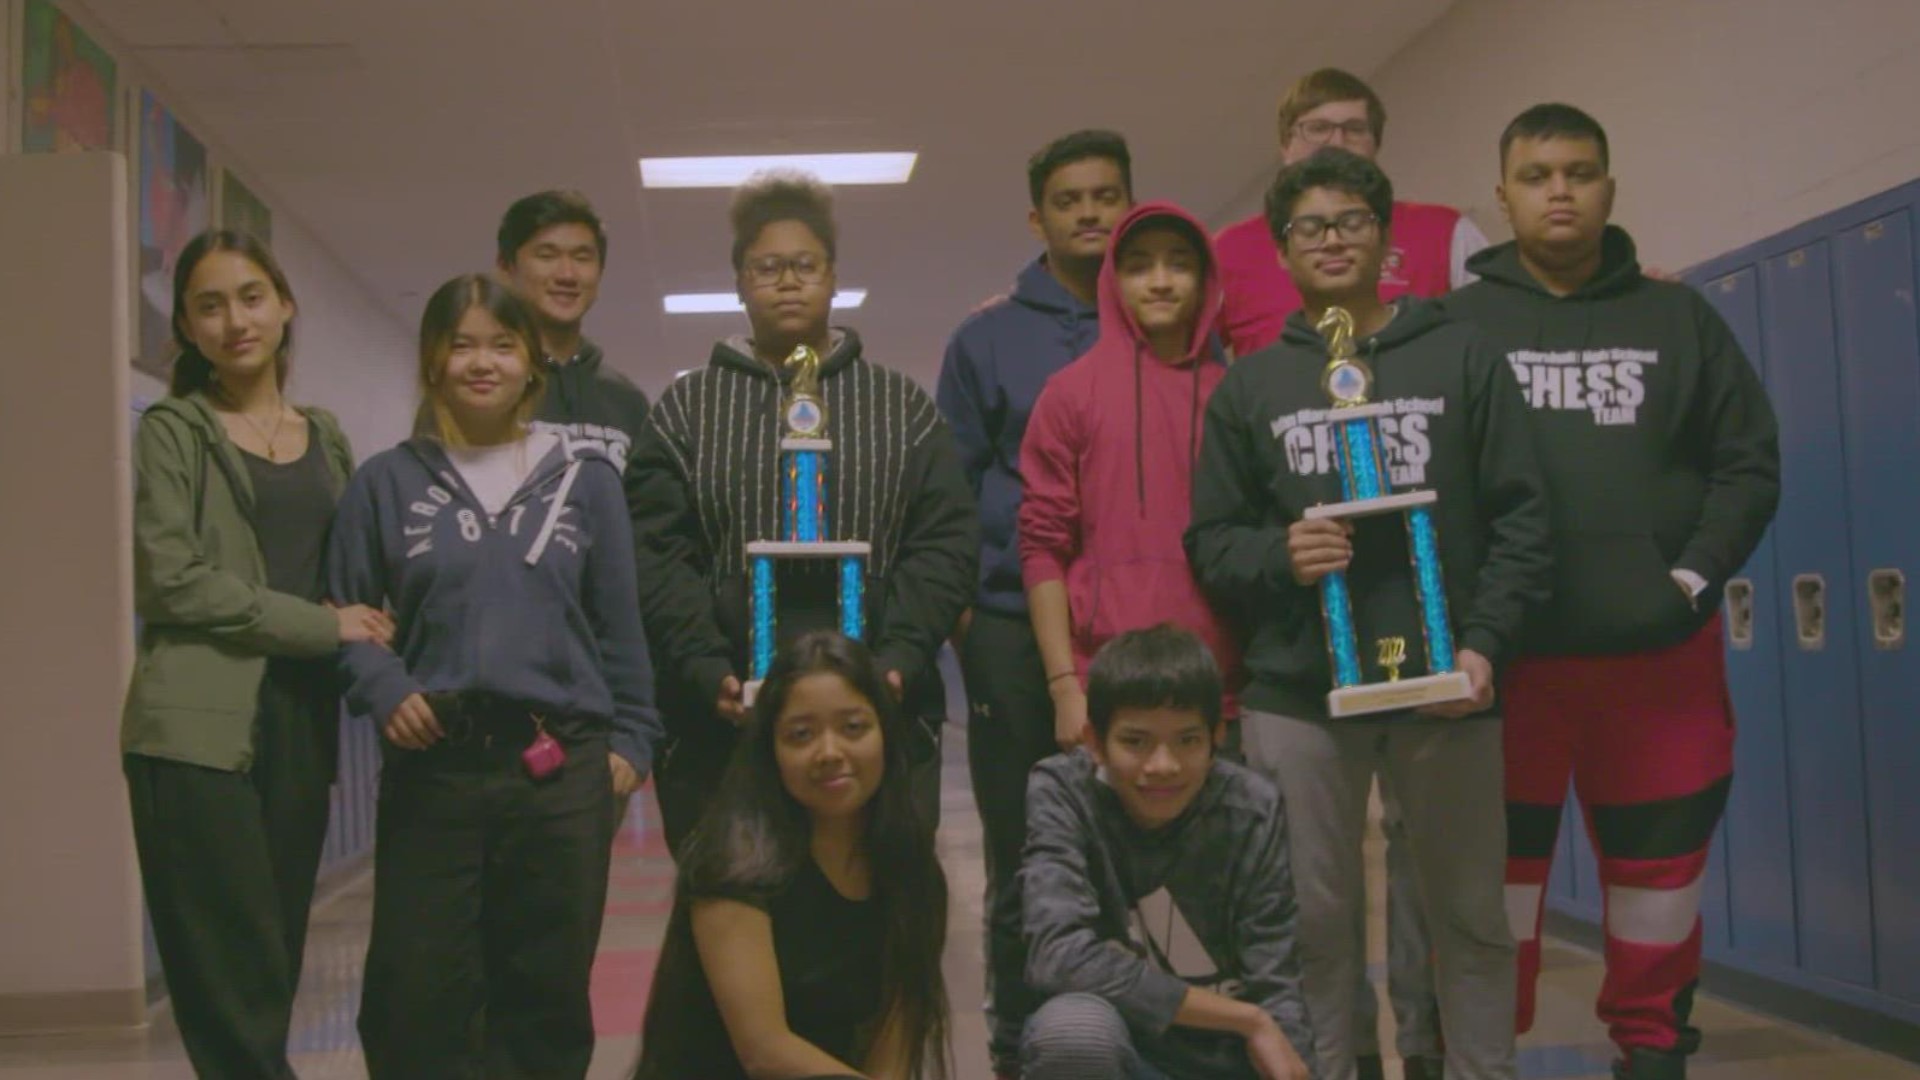 The group is made up of mostly immigrant and refugee students in the Cleveland Metropolitan School District. They recently placed in the top 20 during nationals.